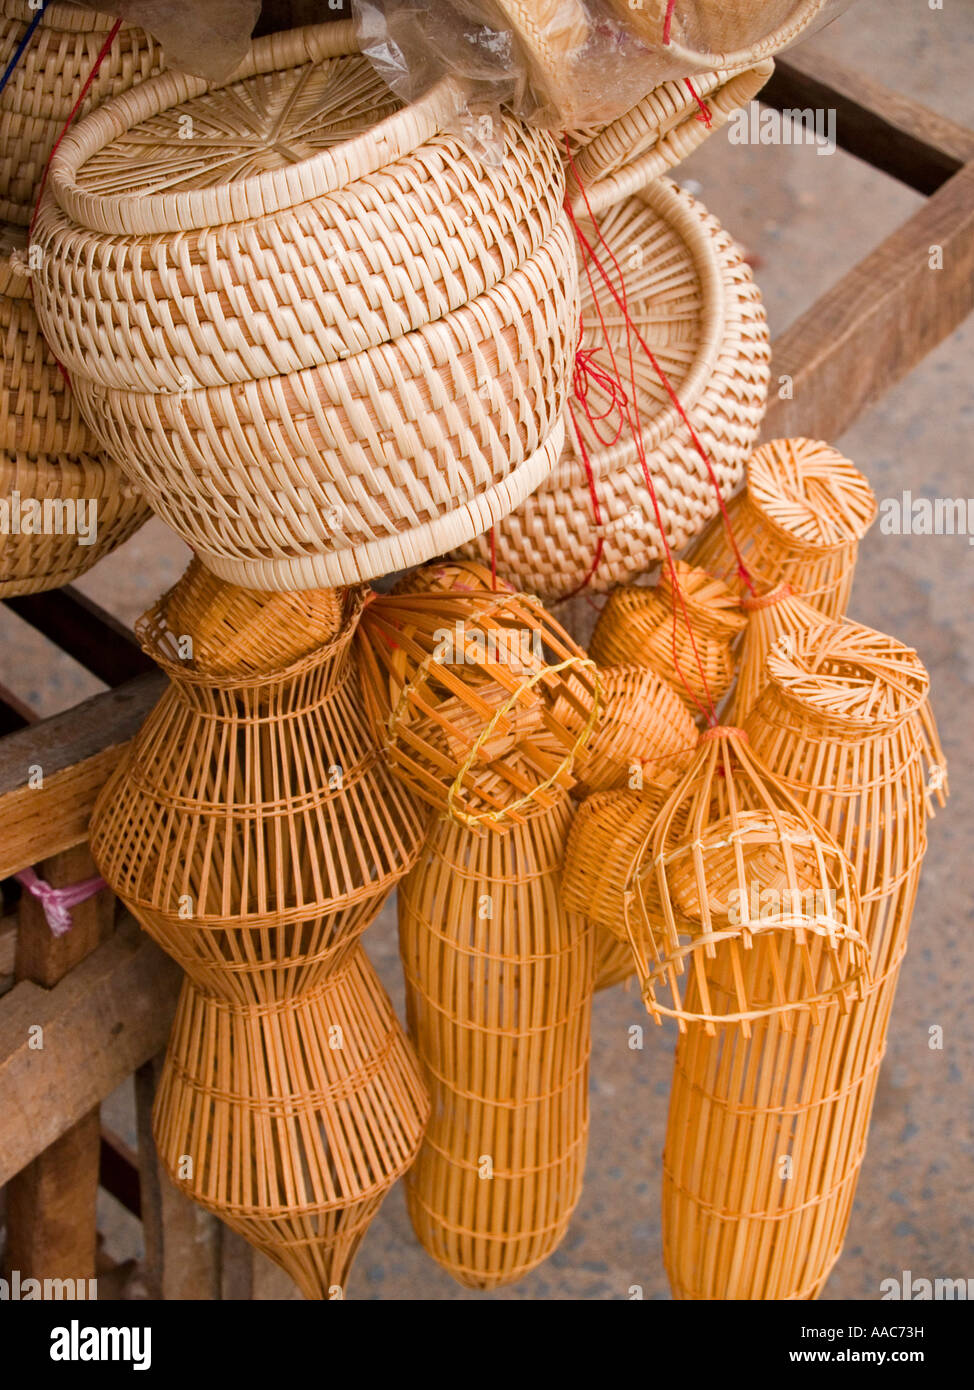 bamboo fishing baskets and sticky rice baskets made by artisans for sale in  Vientiane Laos Stock Photo - Alamy